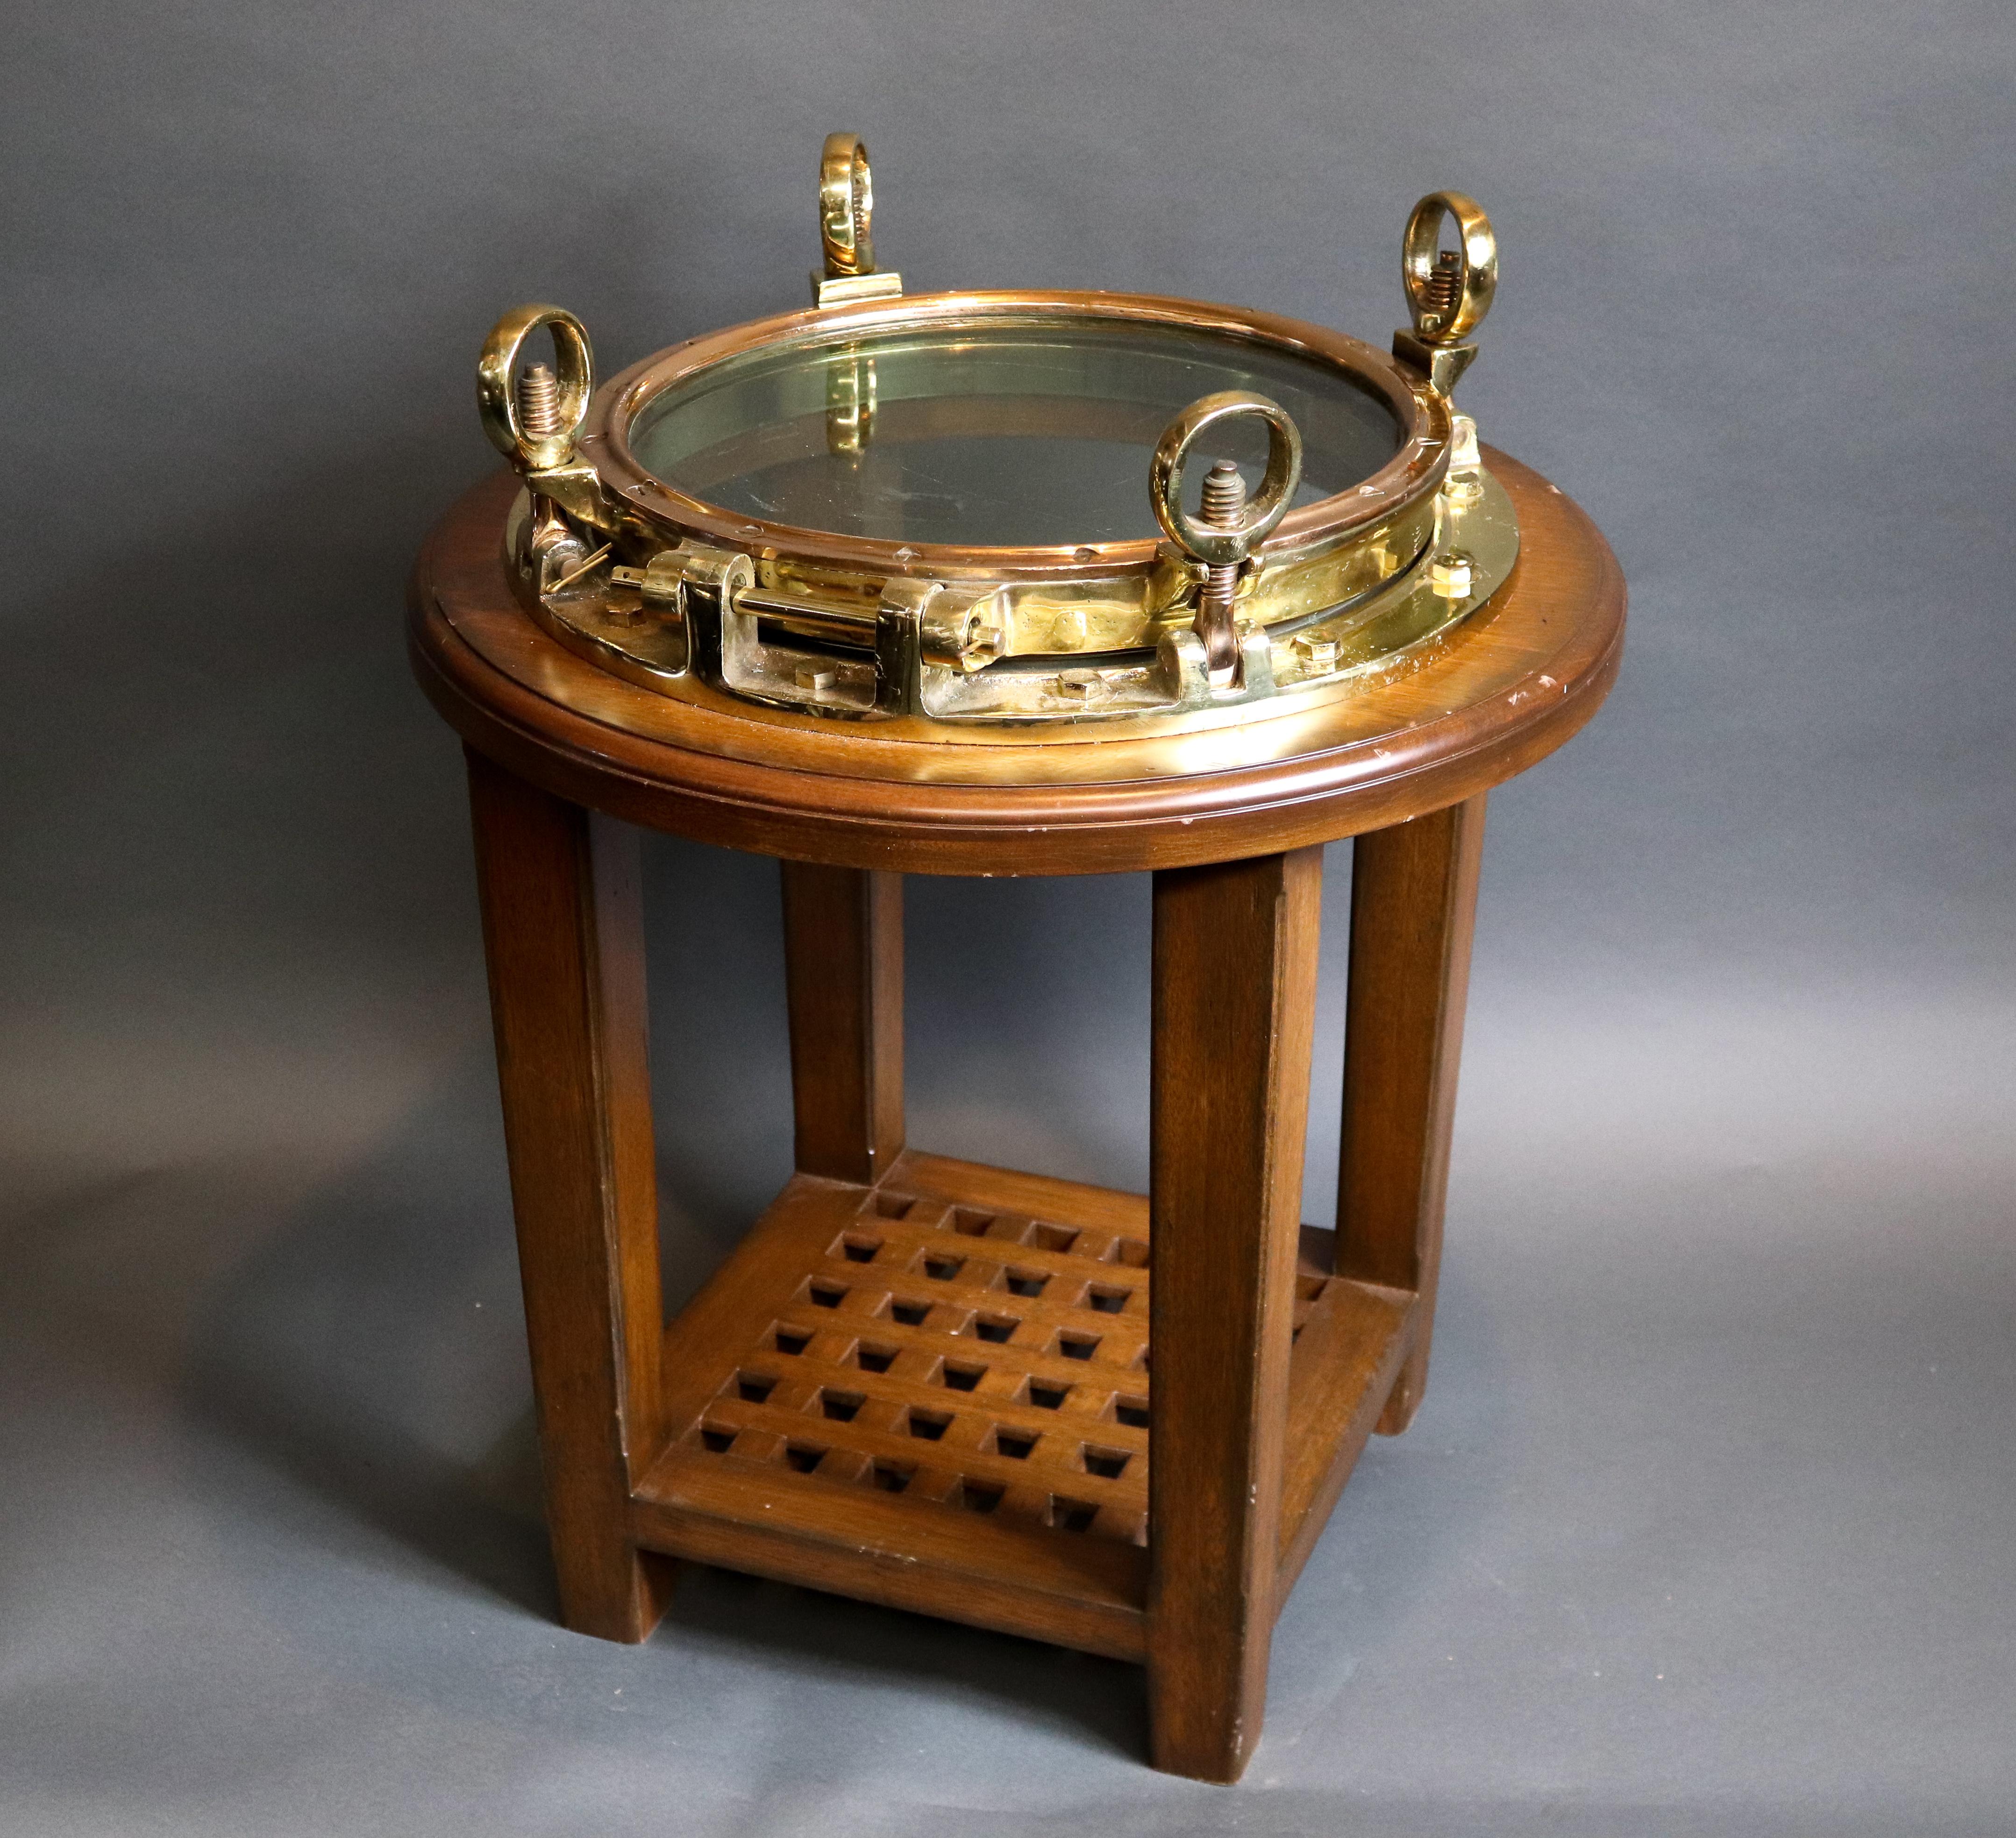 Quality polished brass ships porthole that has been fitted to a custom mahogany table with a shelf with the form of a ships granting. Weight is 80 lbs. 26